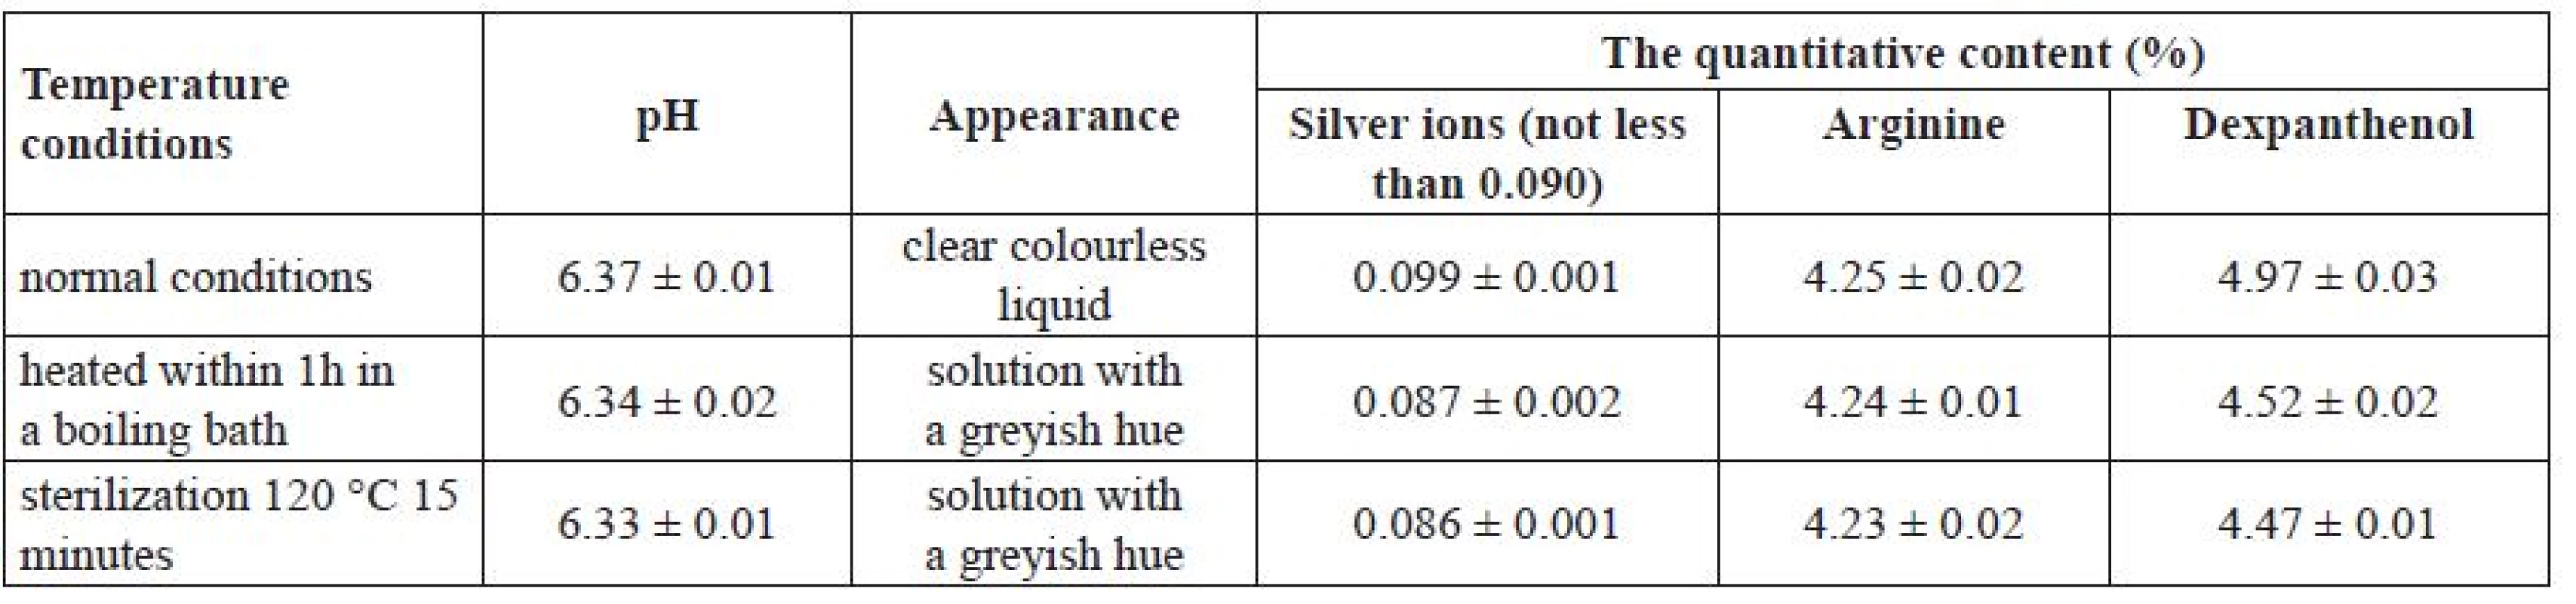 The study of particular quality parameters of sample 1 under different temperature conditions